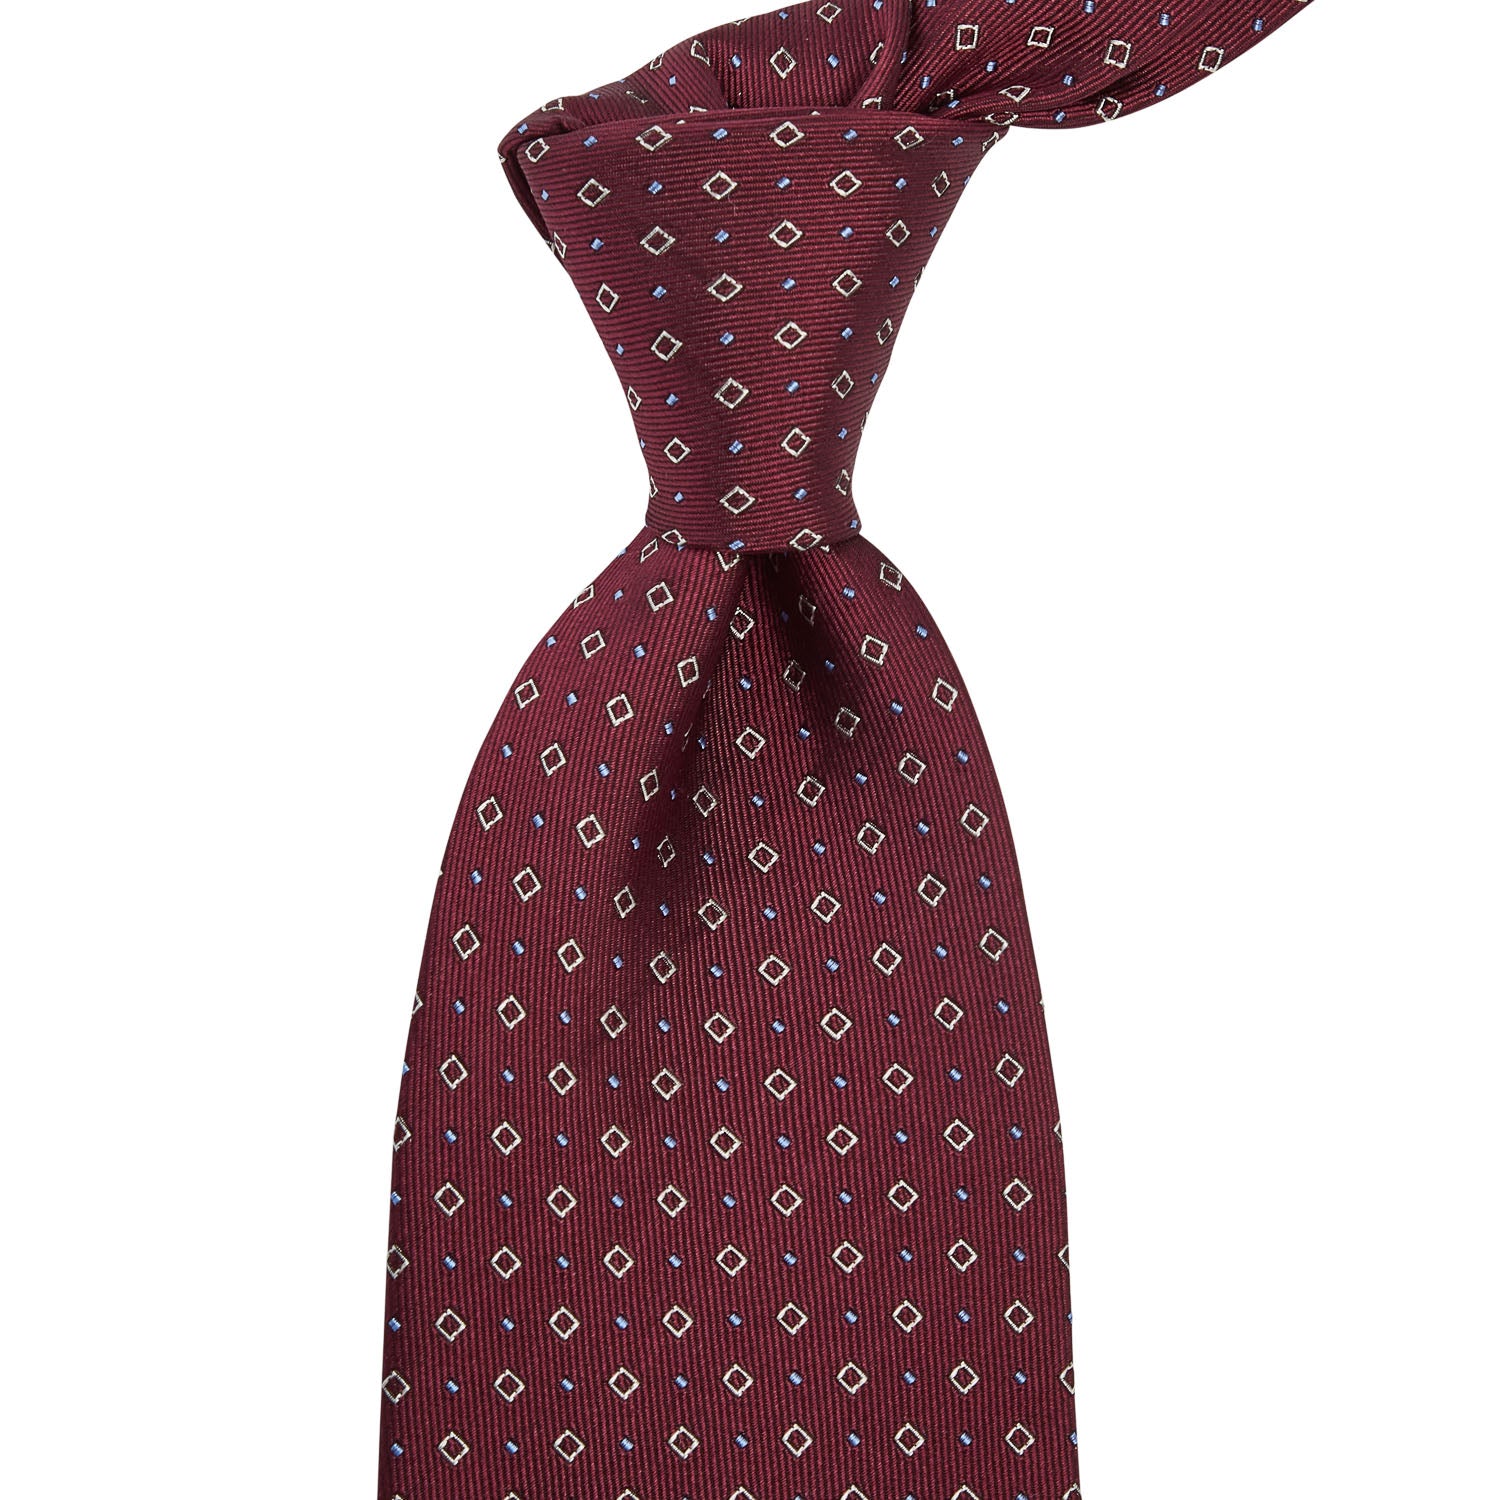 A Sovereign Grade Oxblood Alternating Square Dot Jacquard Tie from KirbyAllison.com, handmade with a small polka dot pattern of the highest quality from the United Kingdom.